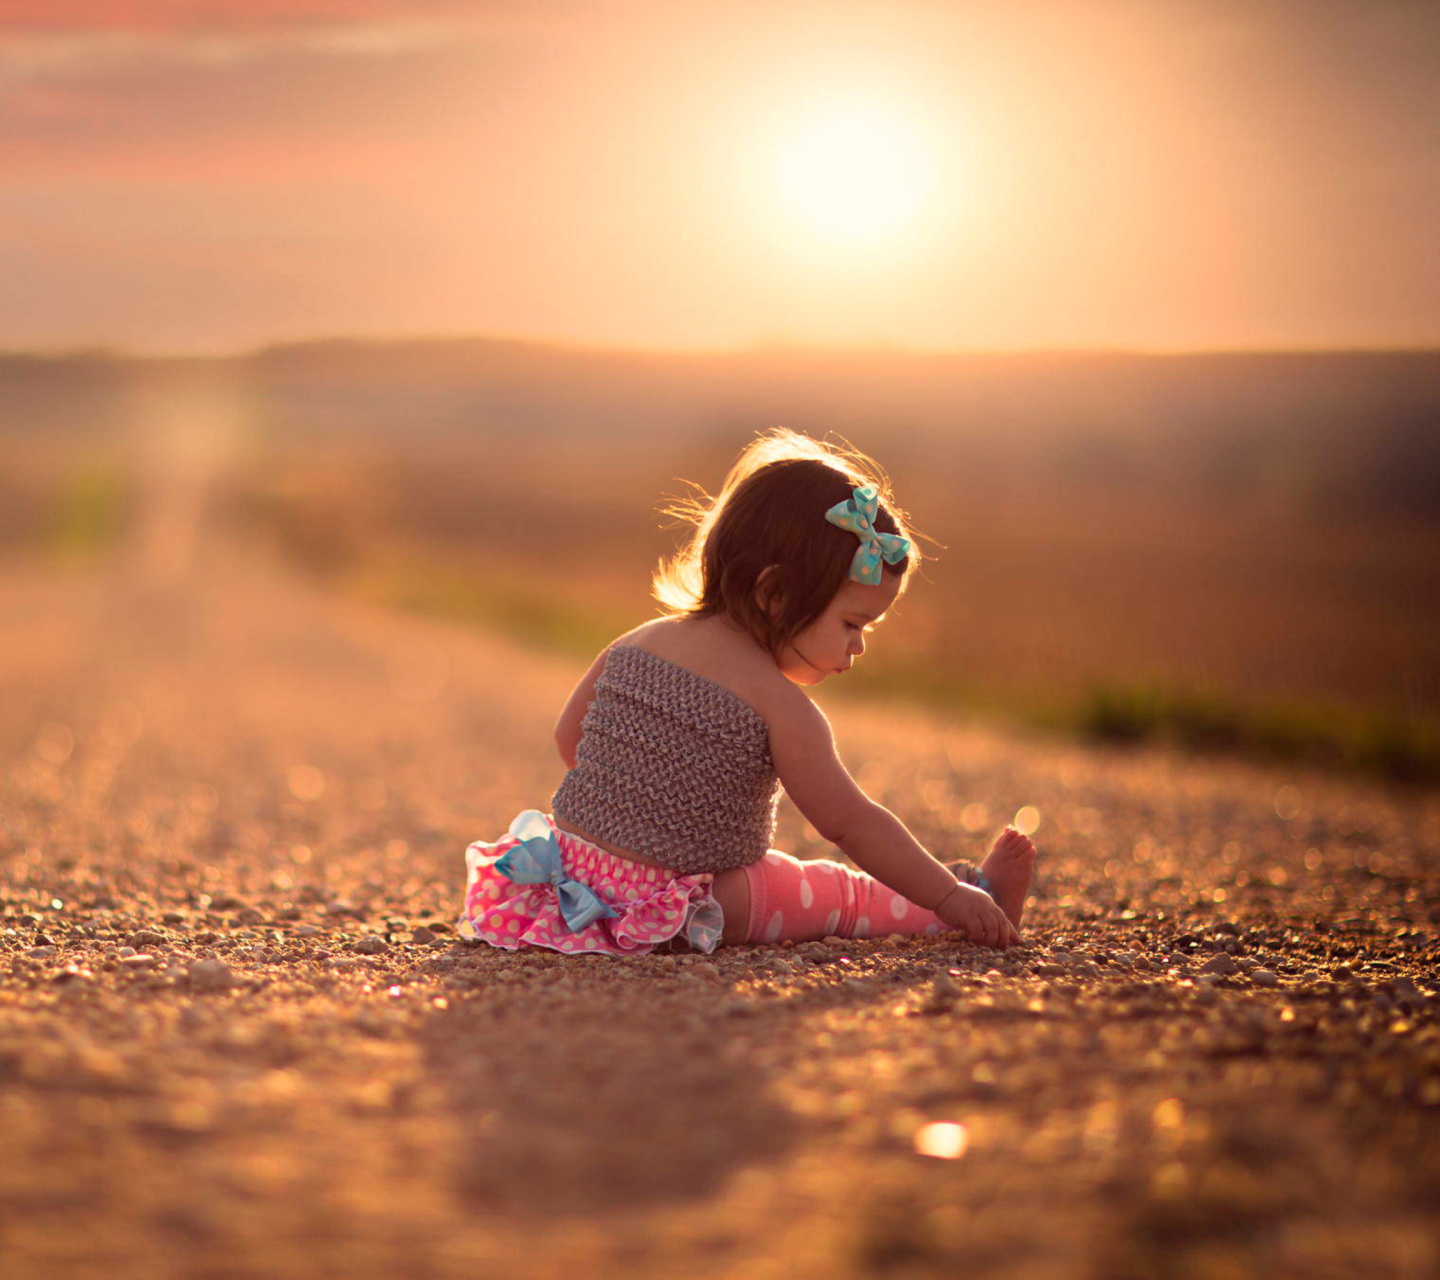 Child On Road At Sunset wallpaper 1440x1280